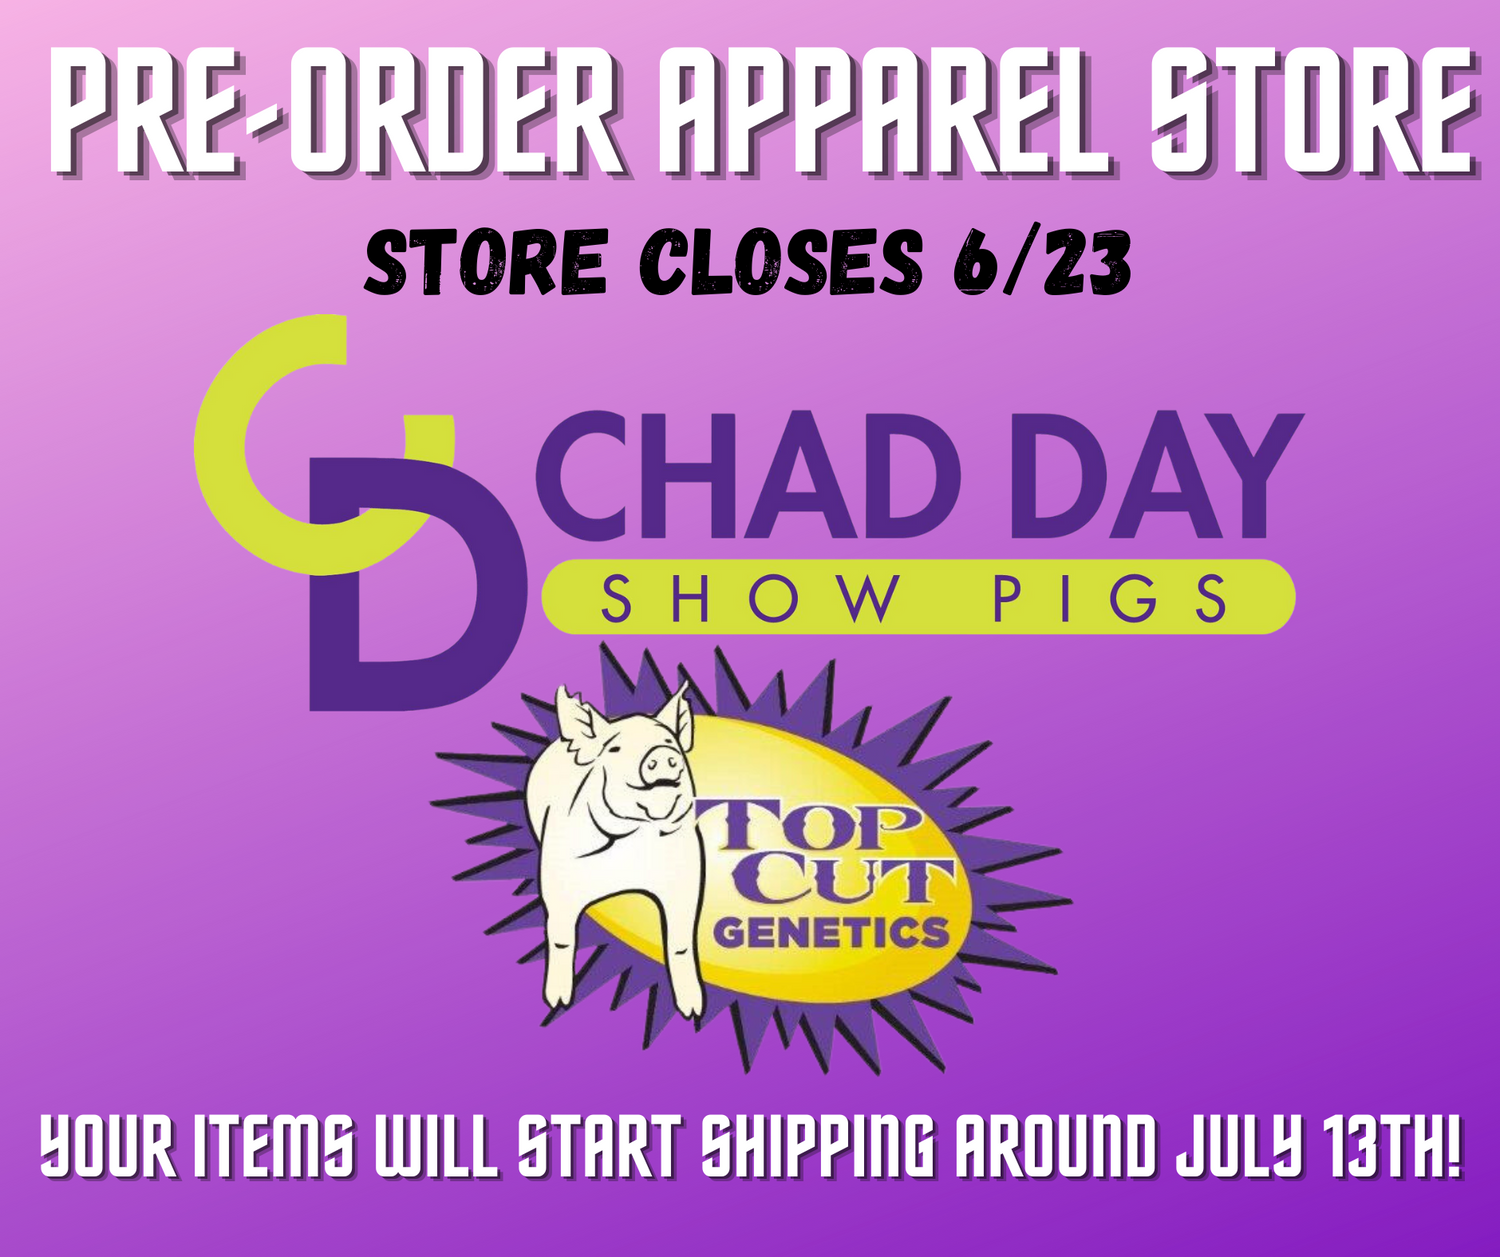 Top Cut Genetics & Chad Day Show Pigs PRE-ORDER Apparel Store